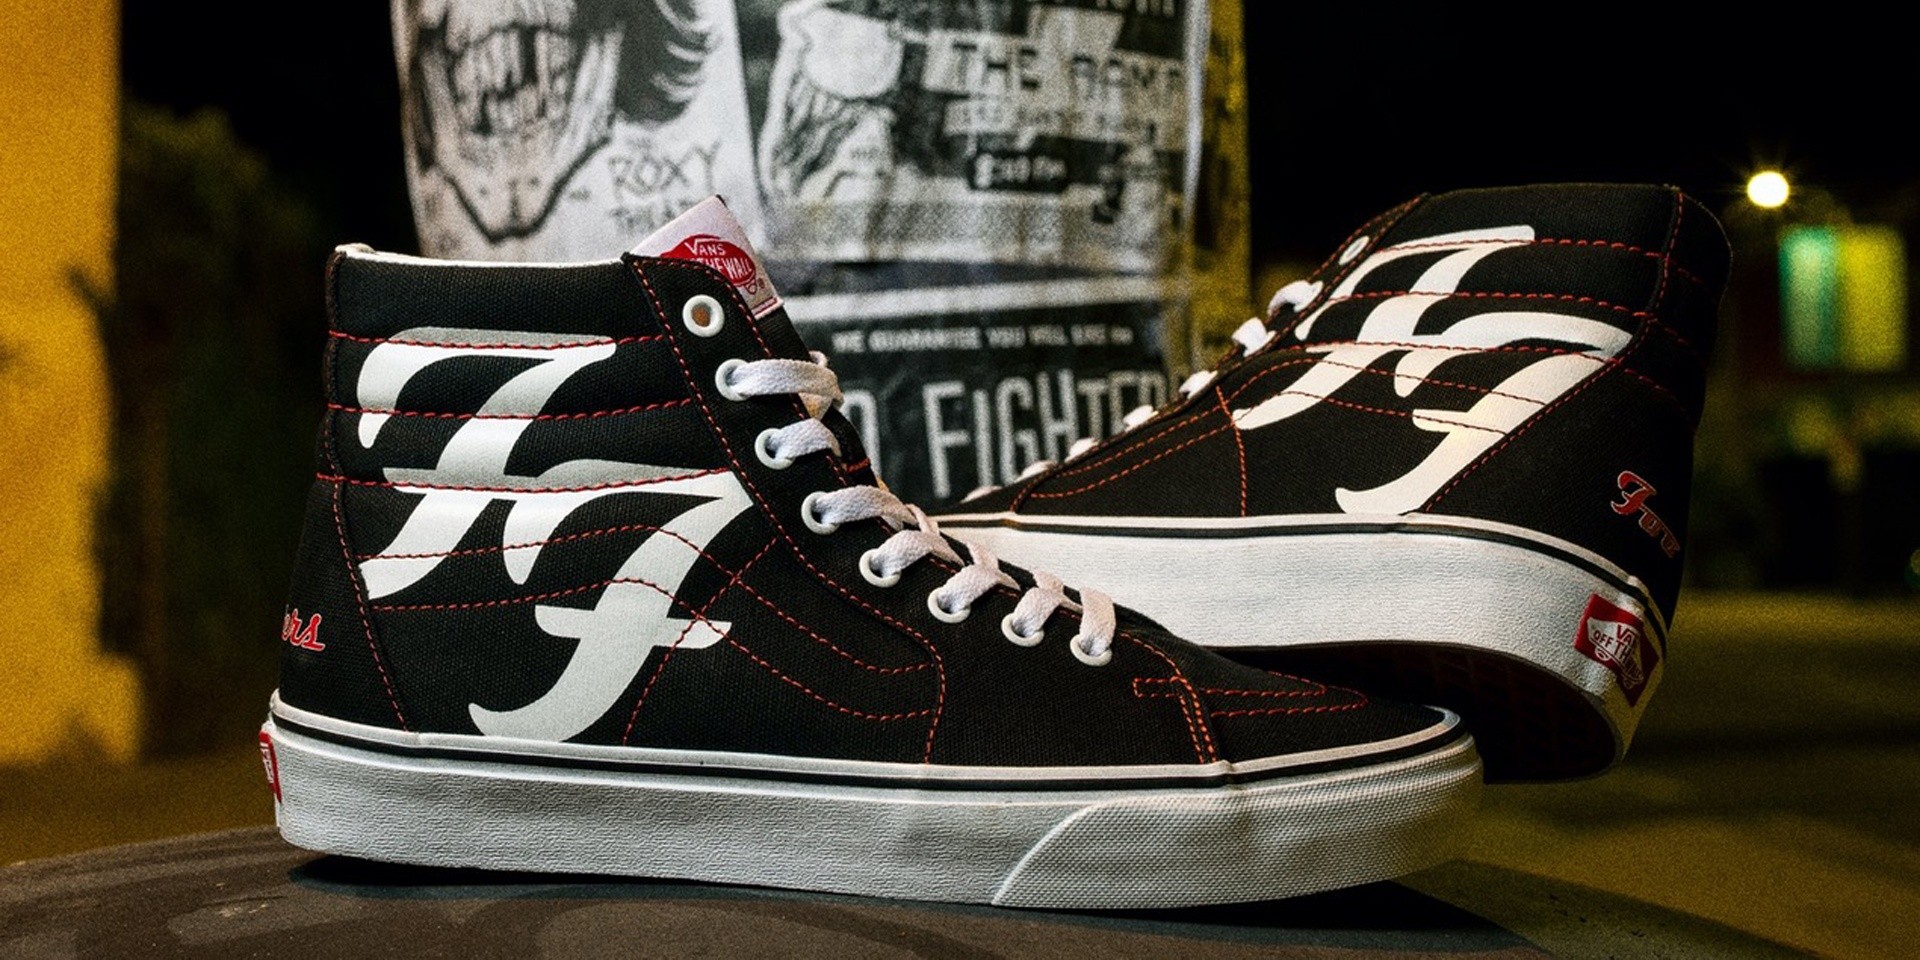 Foo Fighters celebrate 25th anniversary with special edition Vans Sk8-Hi